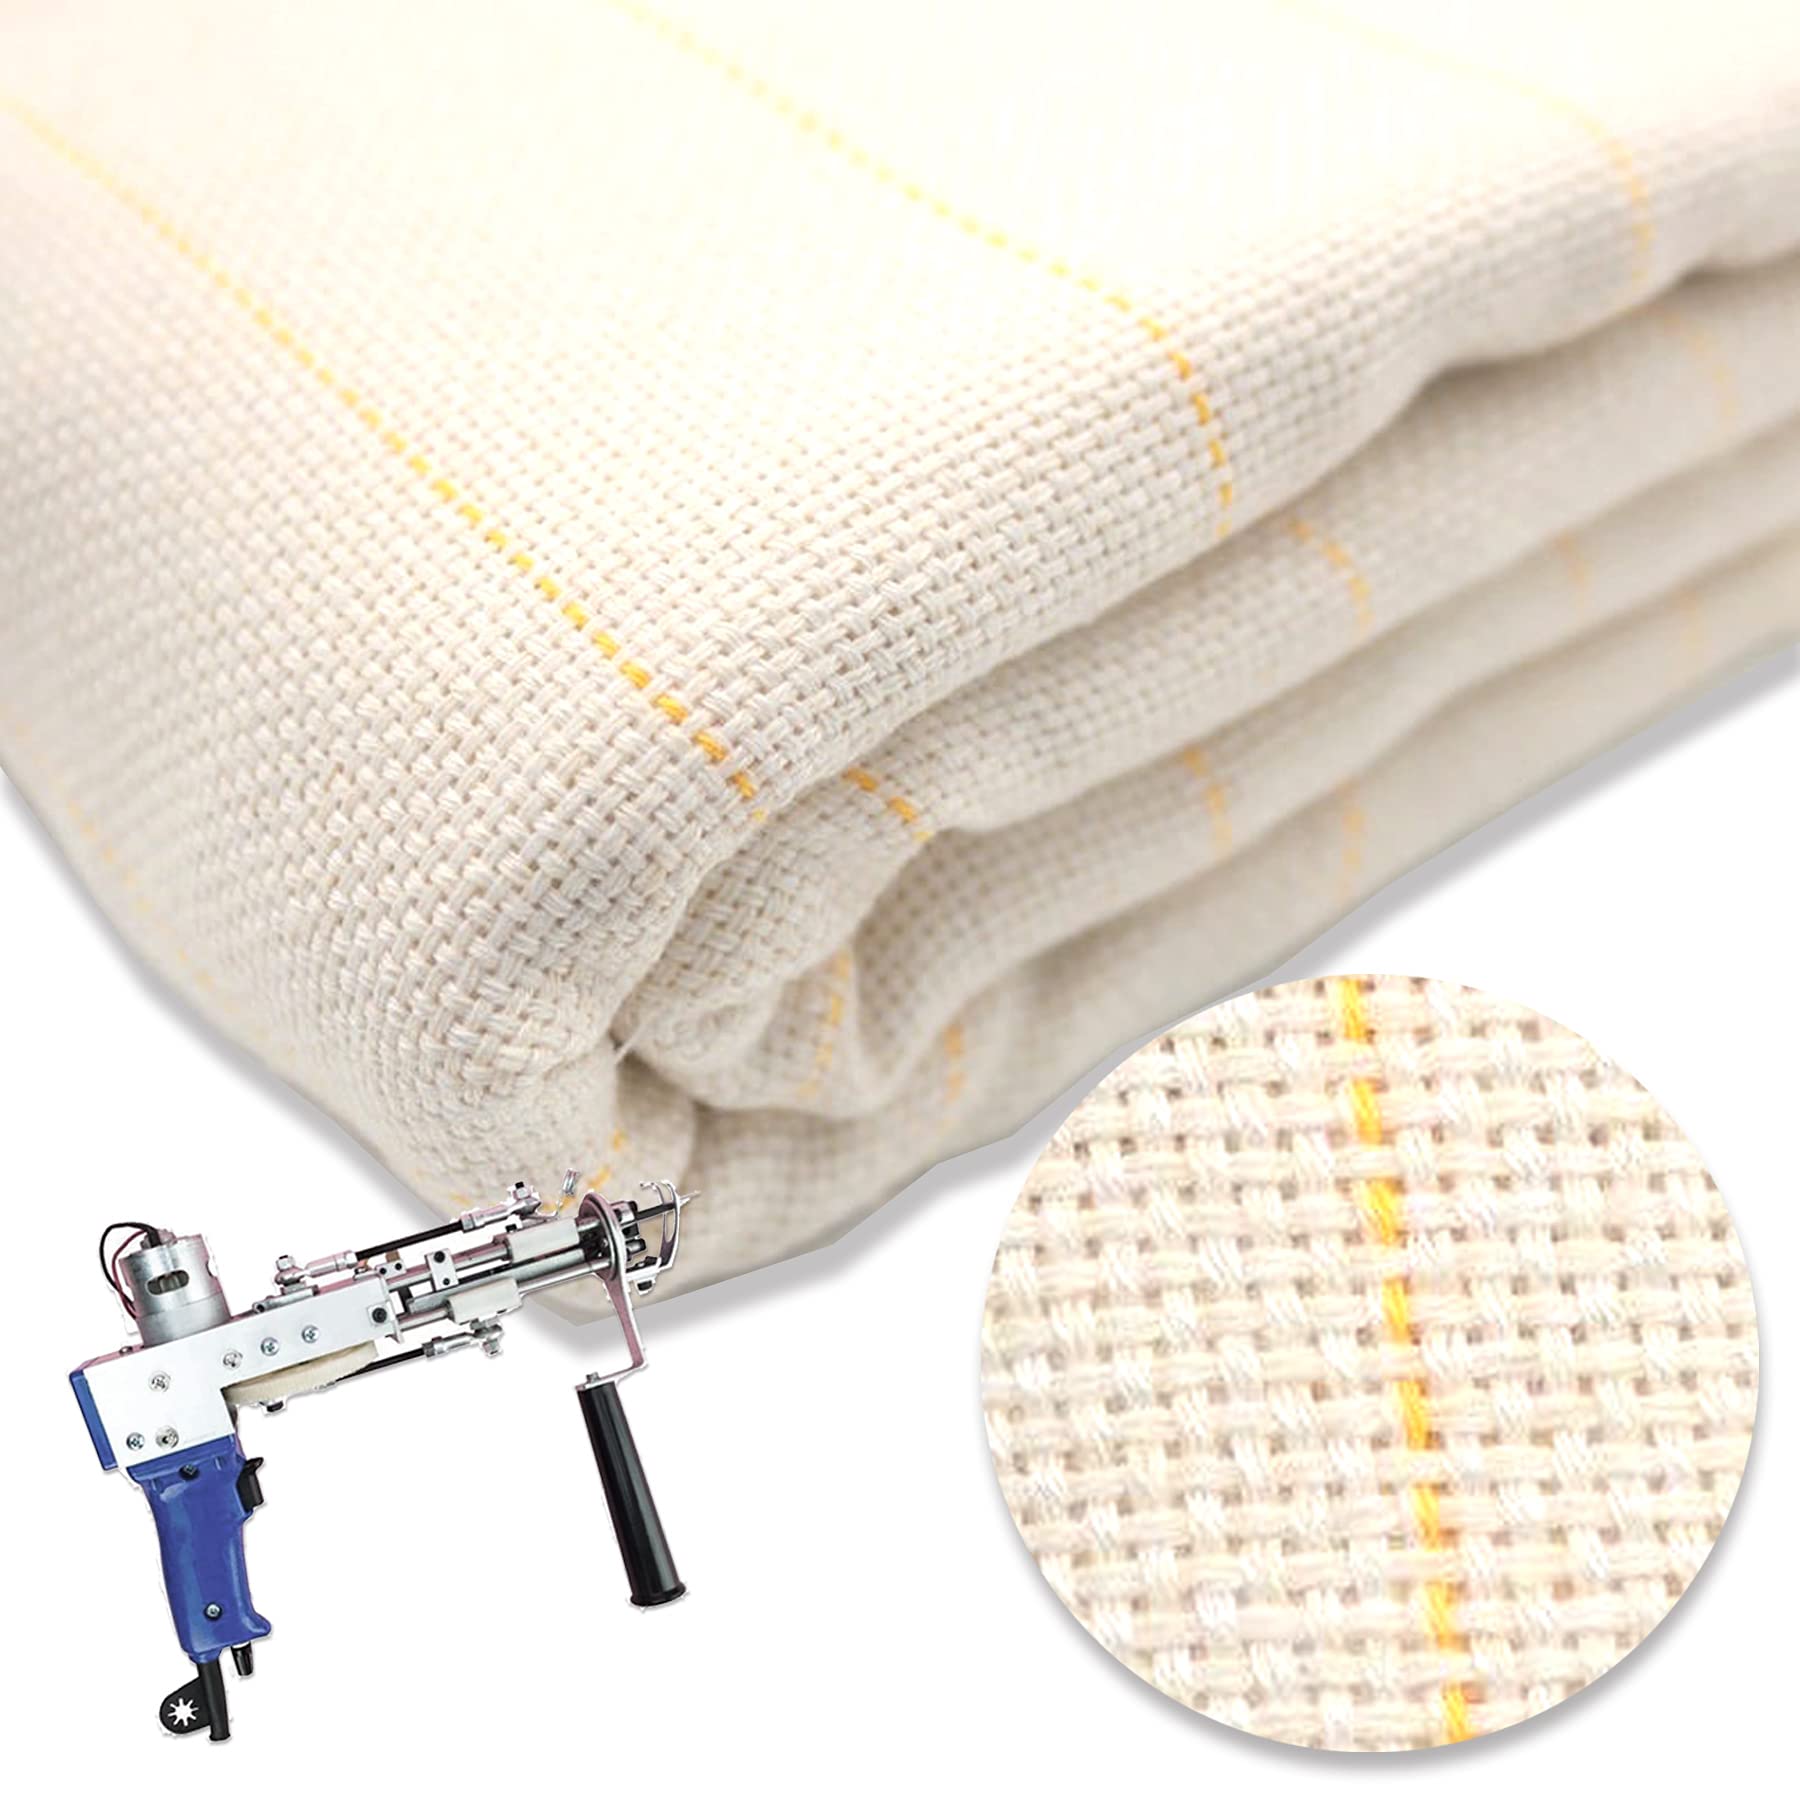 Primary Tufting Cloth with Marked Lines Large Size Needlework Fabric Monk's  Cloth for Tufting Gun Rug-Punch Punch Needle 45''x45'' 45*45 in